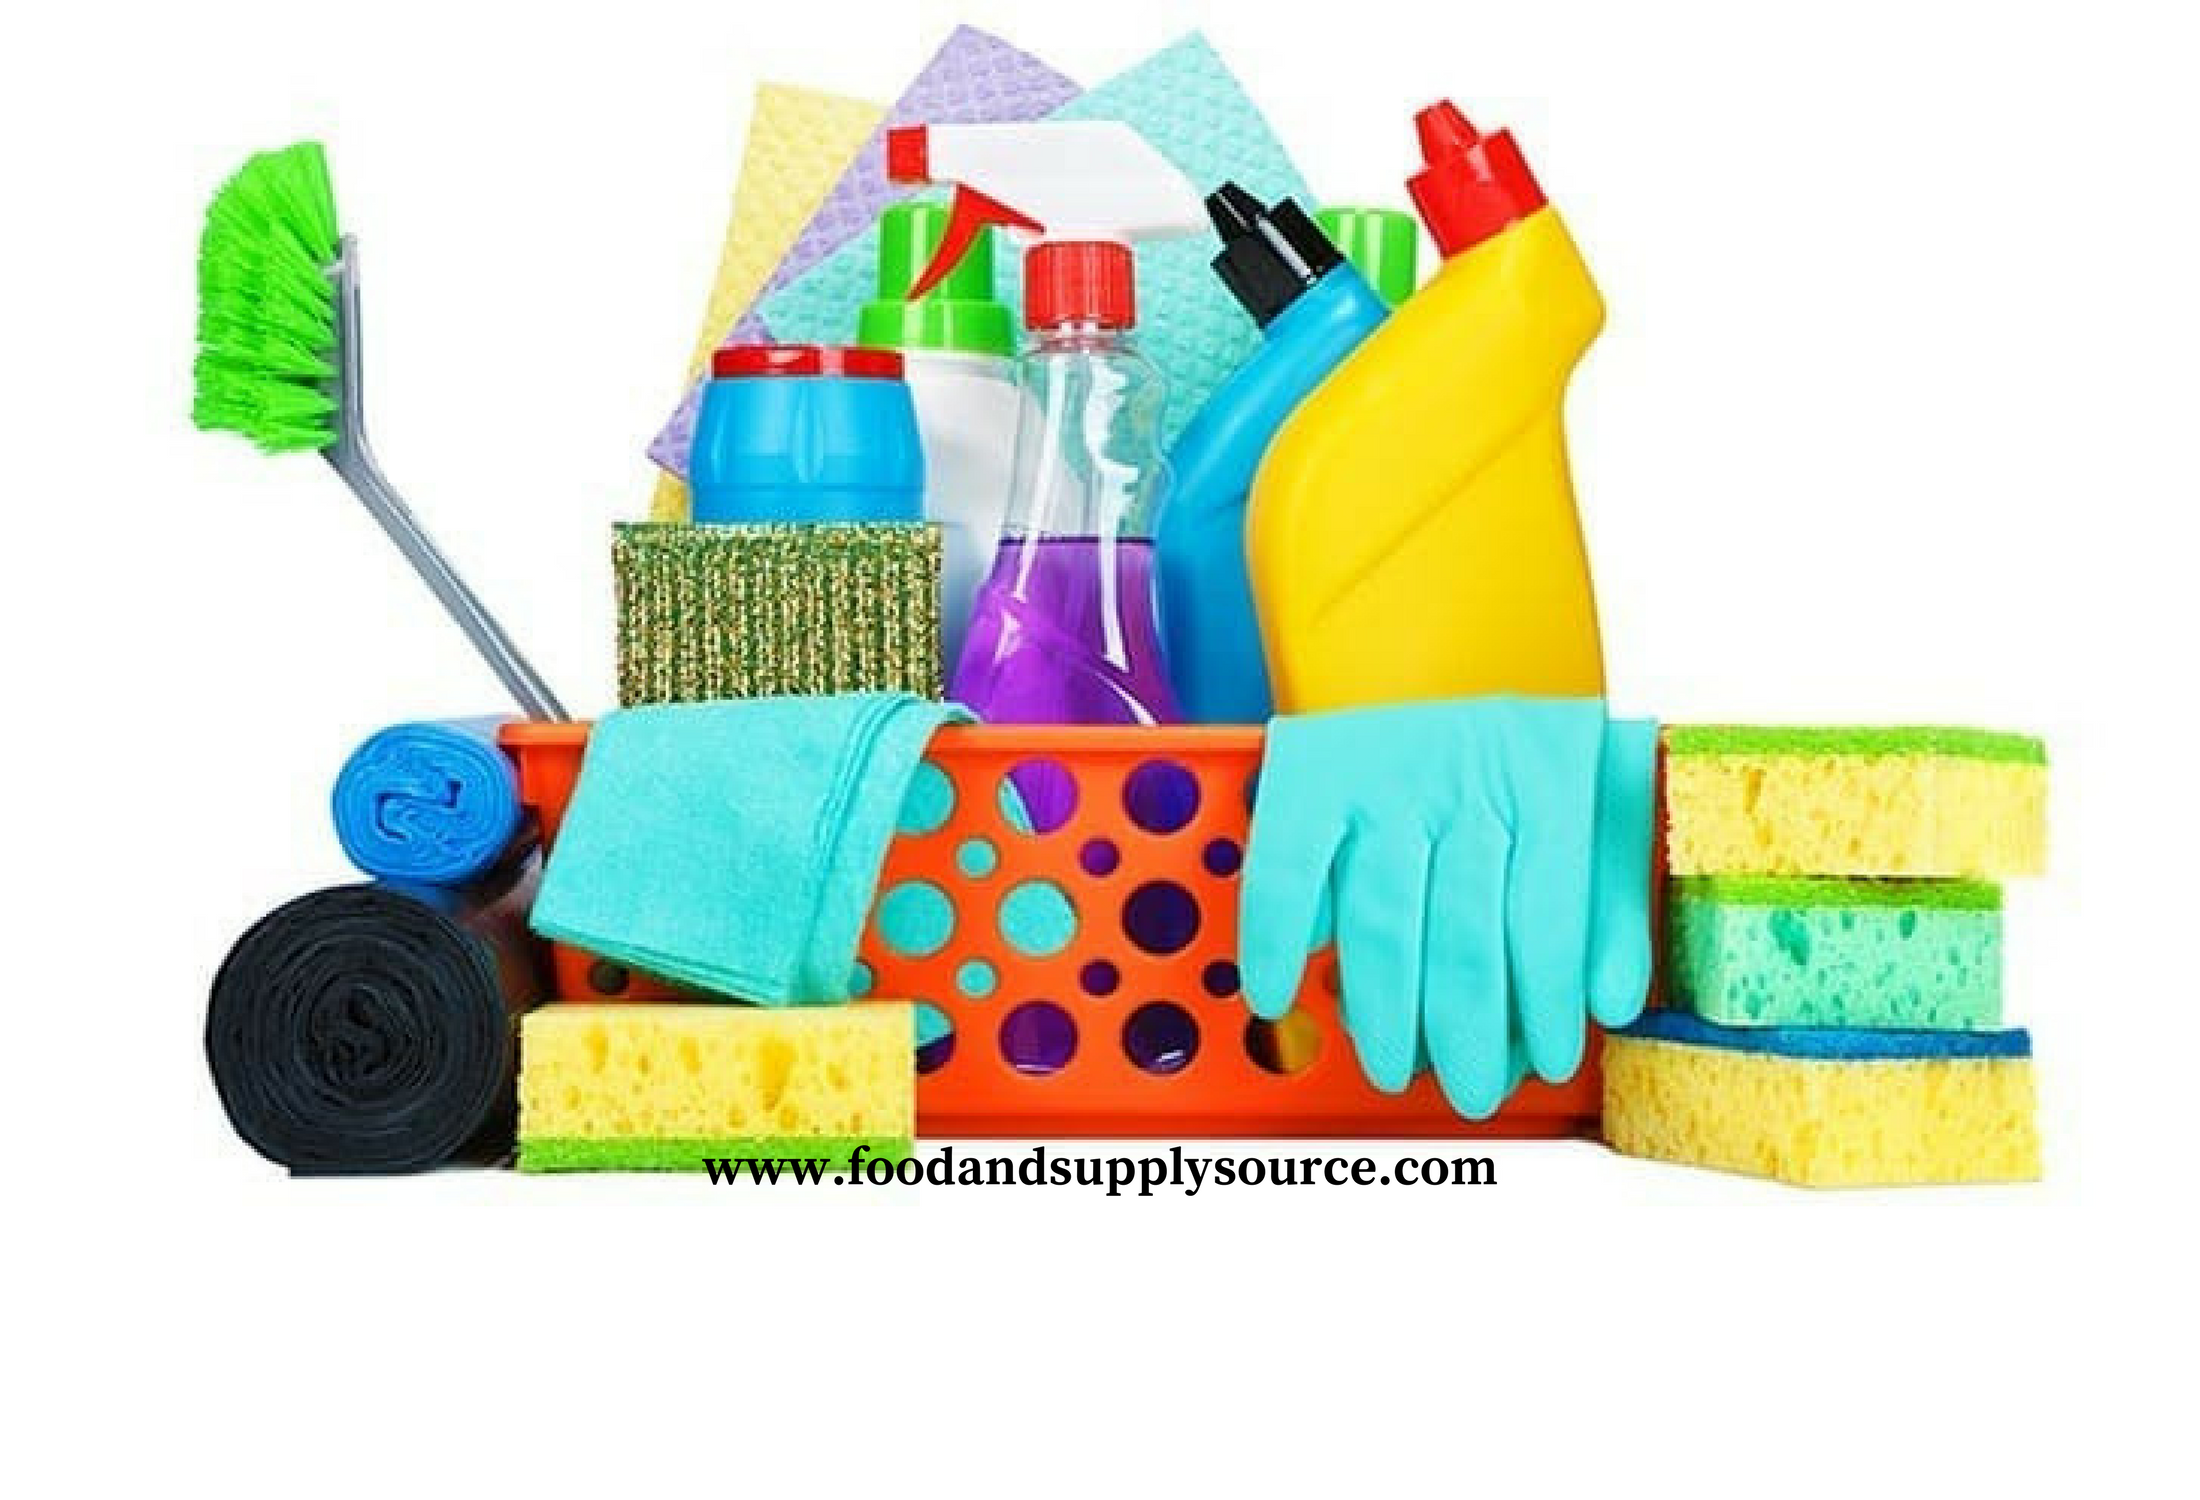 Wholesale Cleaning Supplies: Ways to Lower Costs for Head Start ...